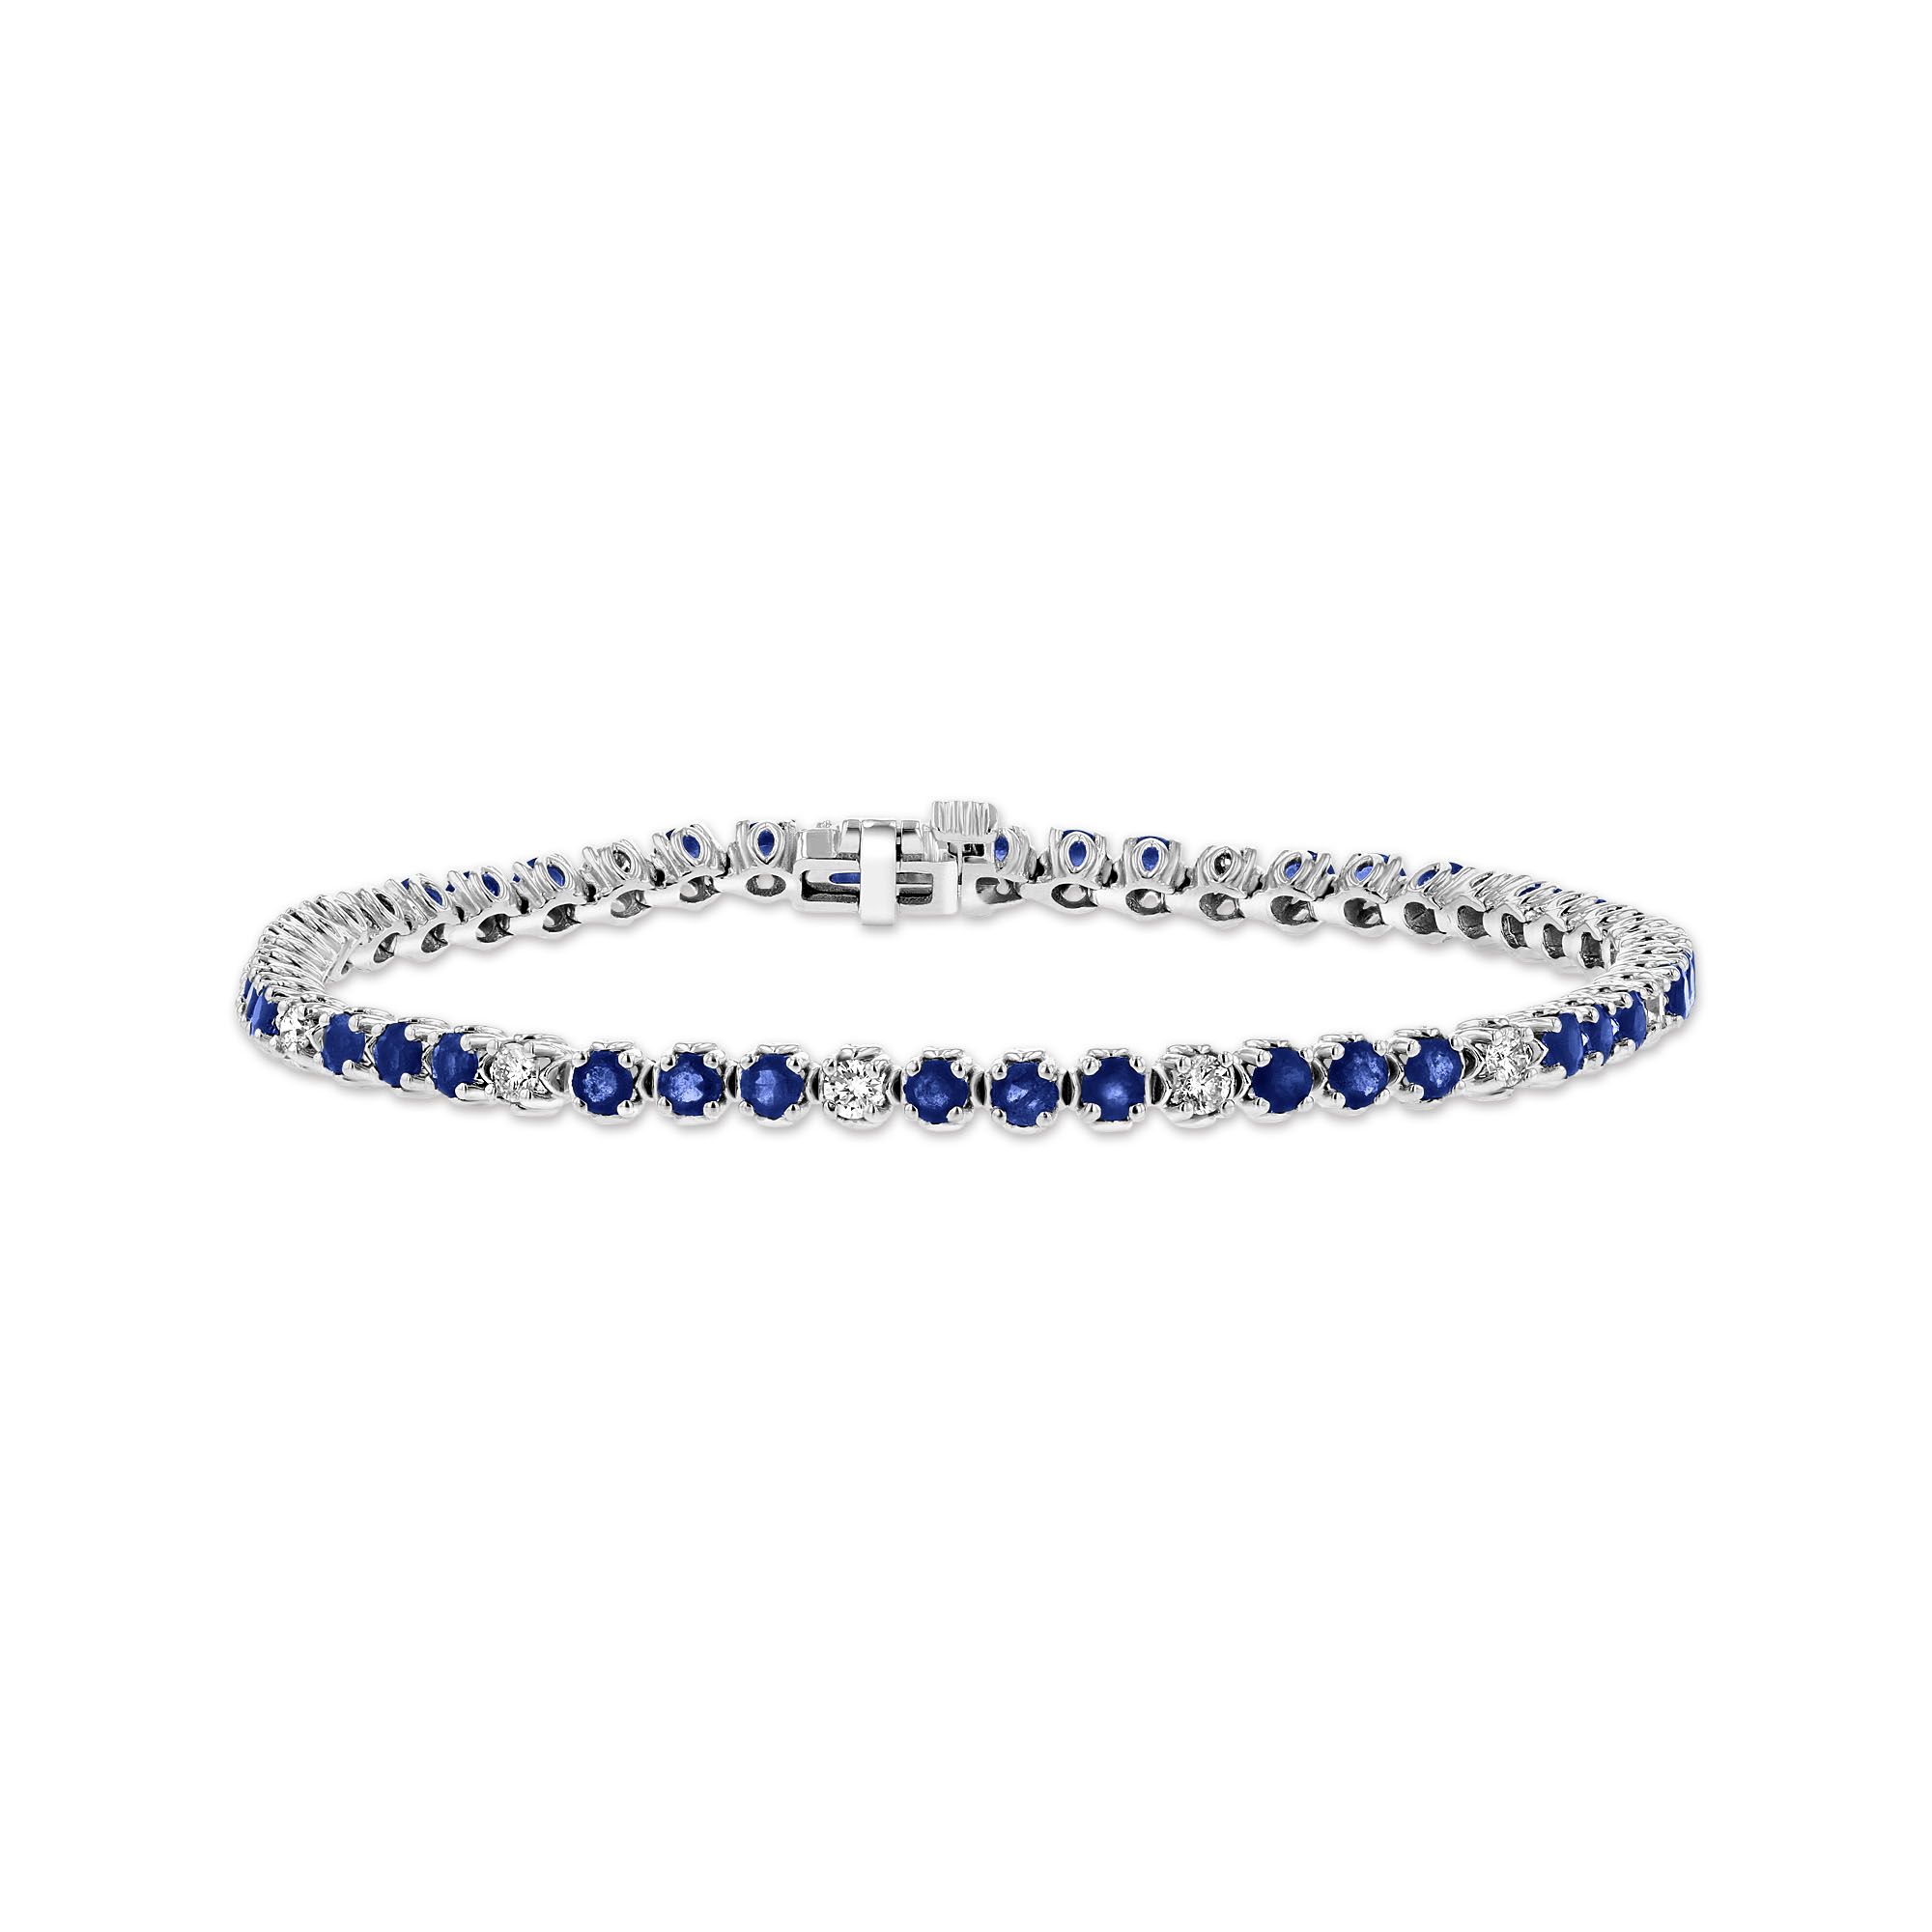 View 3.09ctw Diamond and Sapphire Bracelet in 14k White Gold